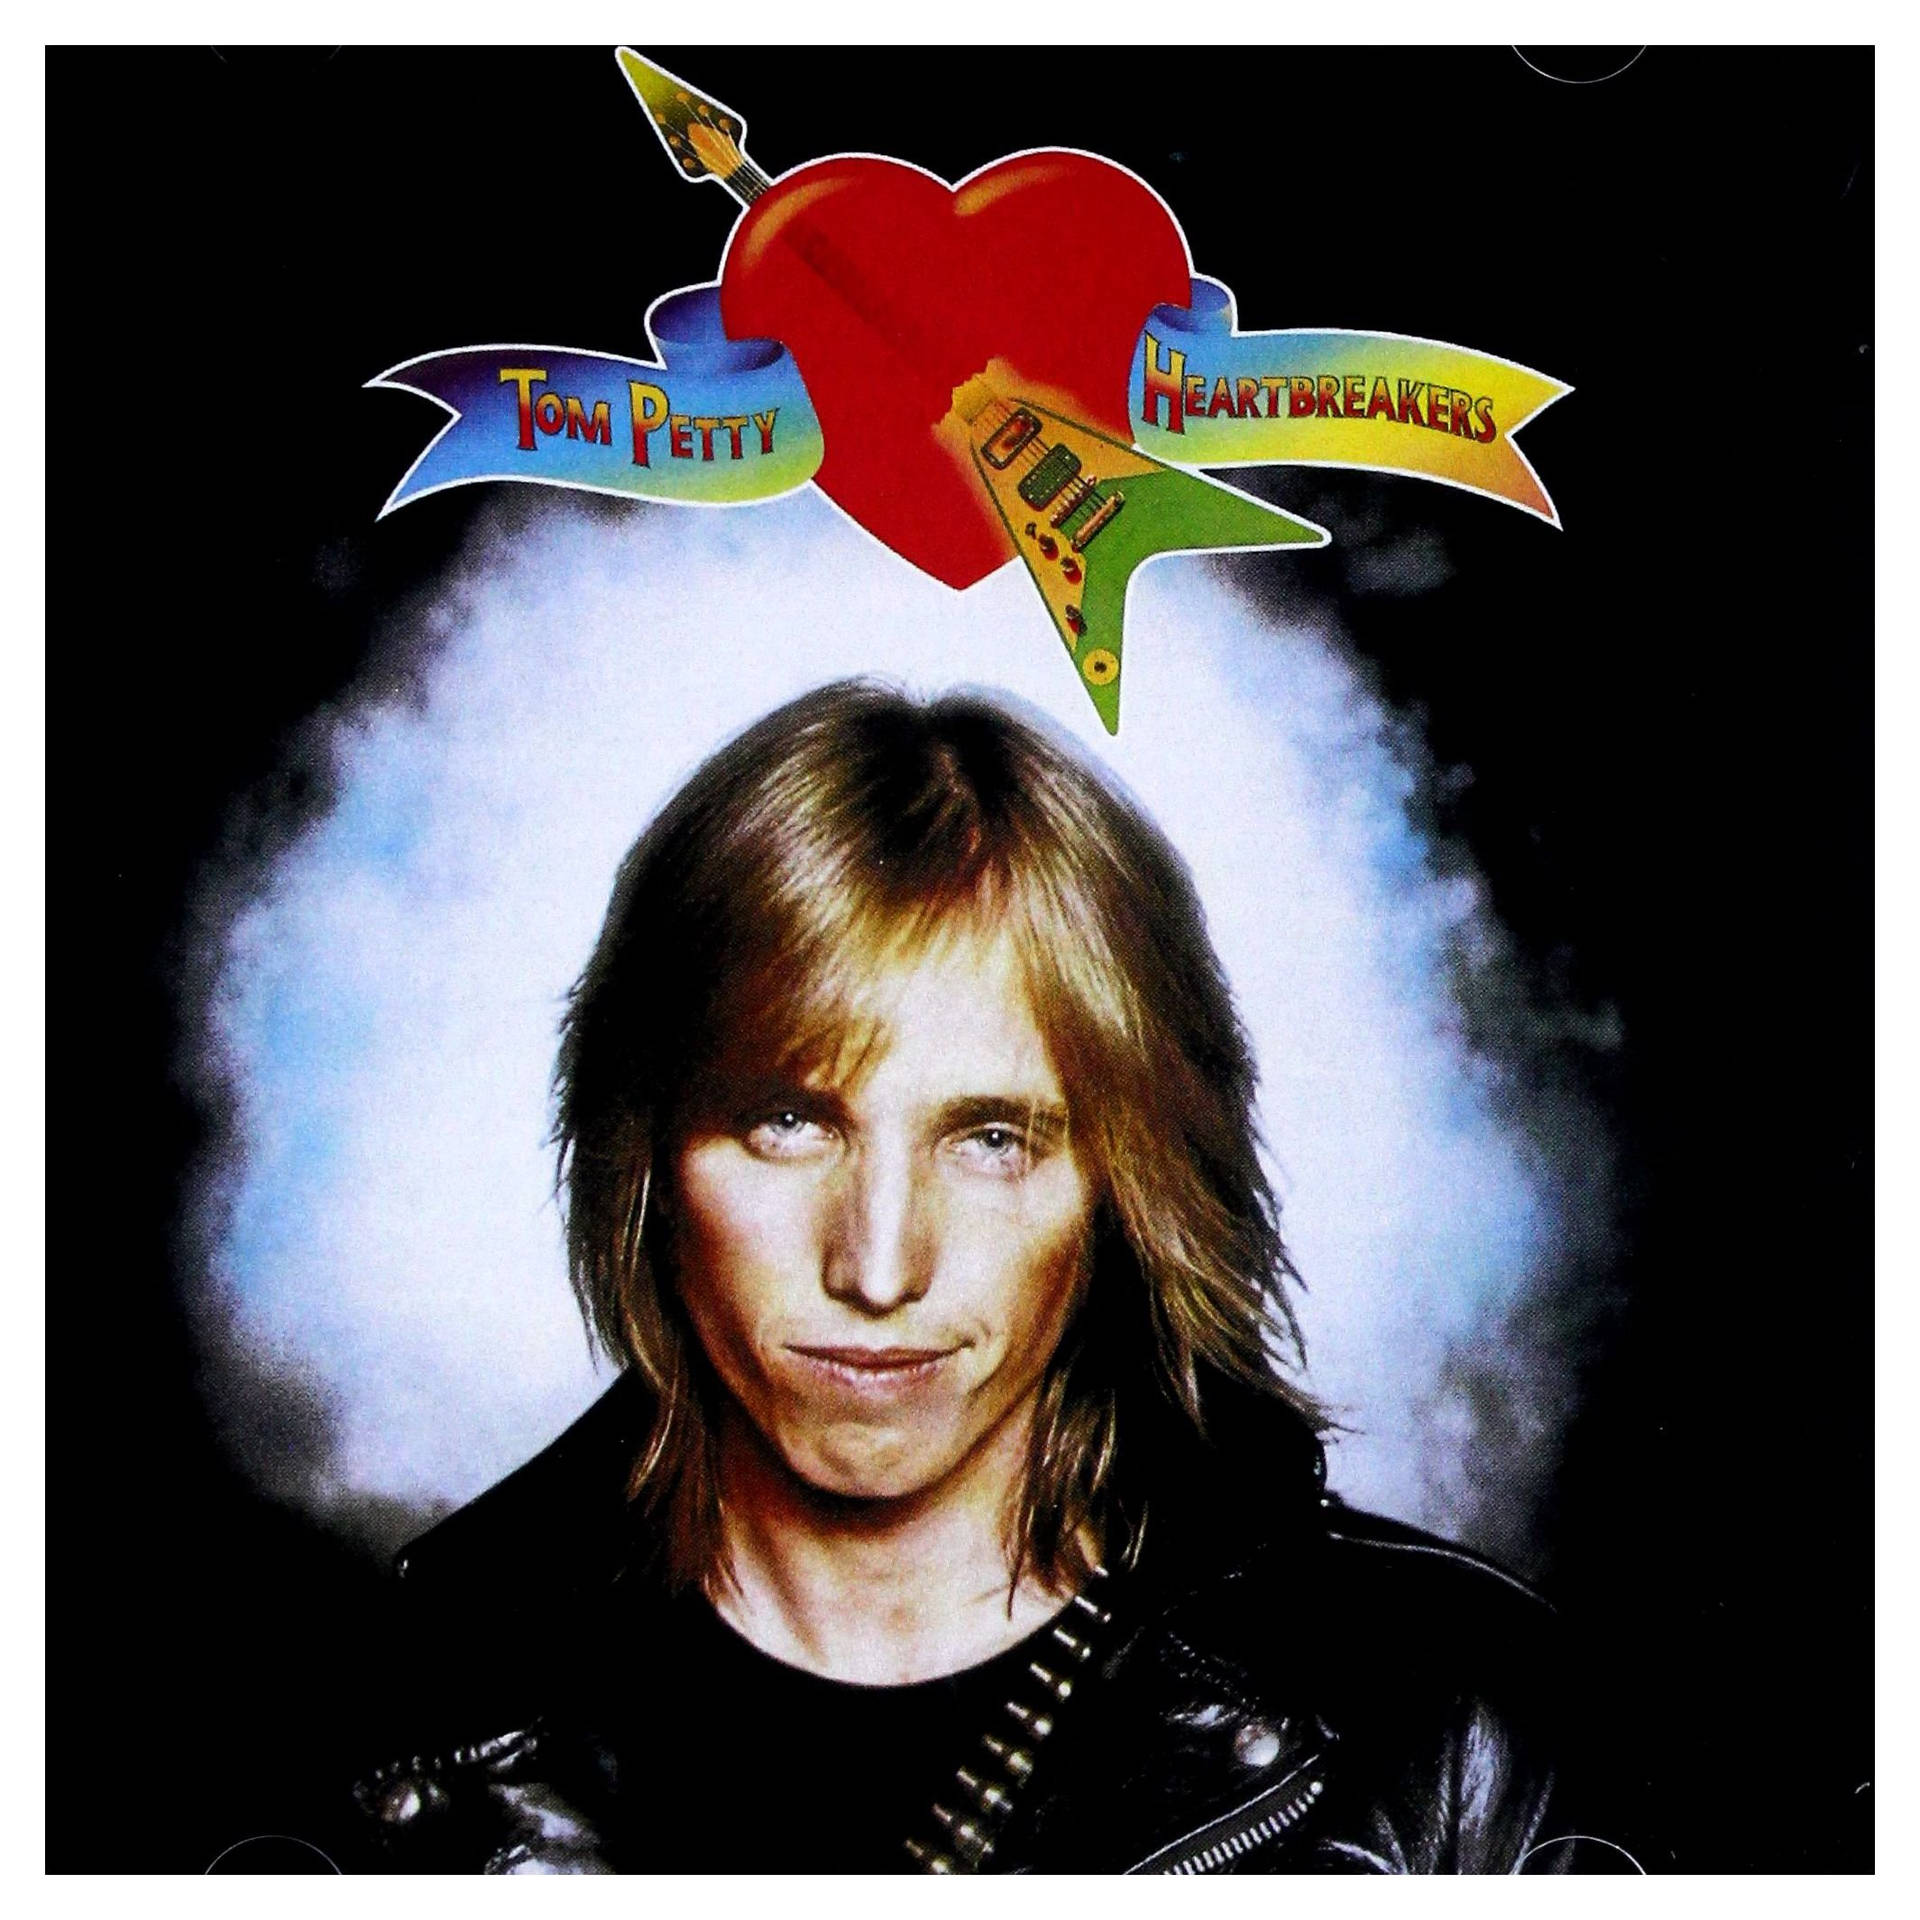 American Rock Band Tom Petty And The Heartbreakers Album Wallpaper